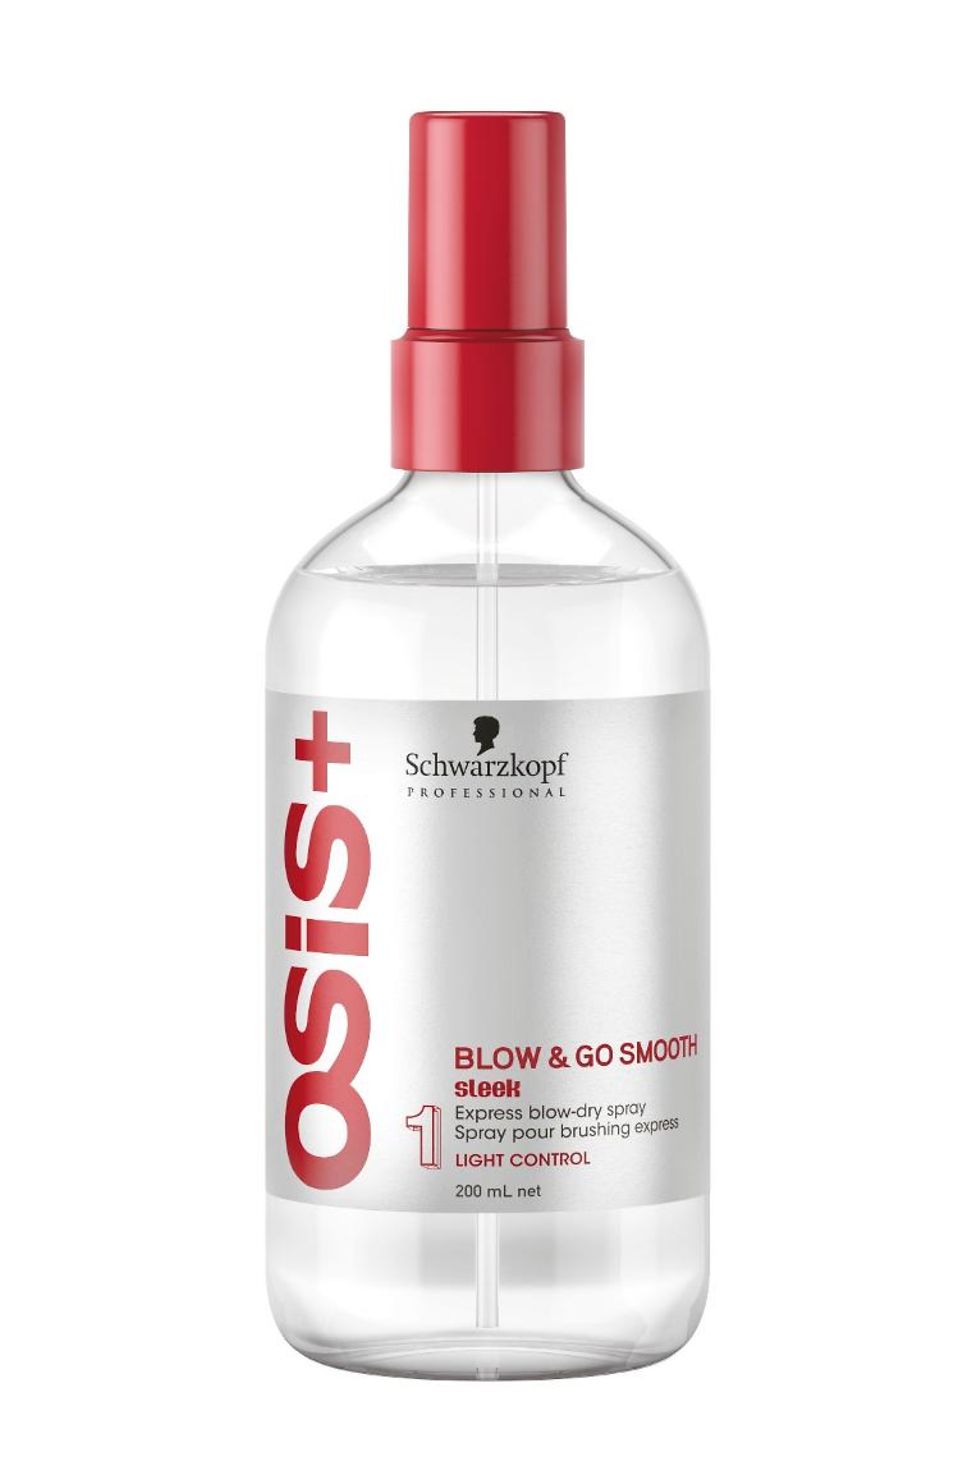 OSiS+ Blow & Go Smooth